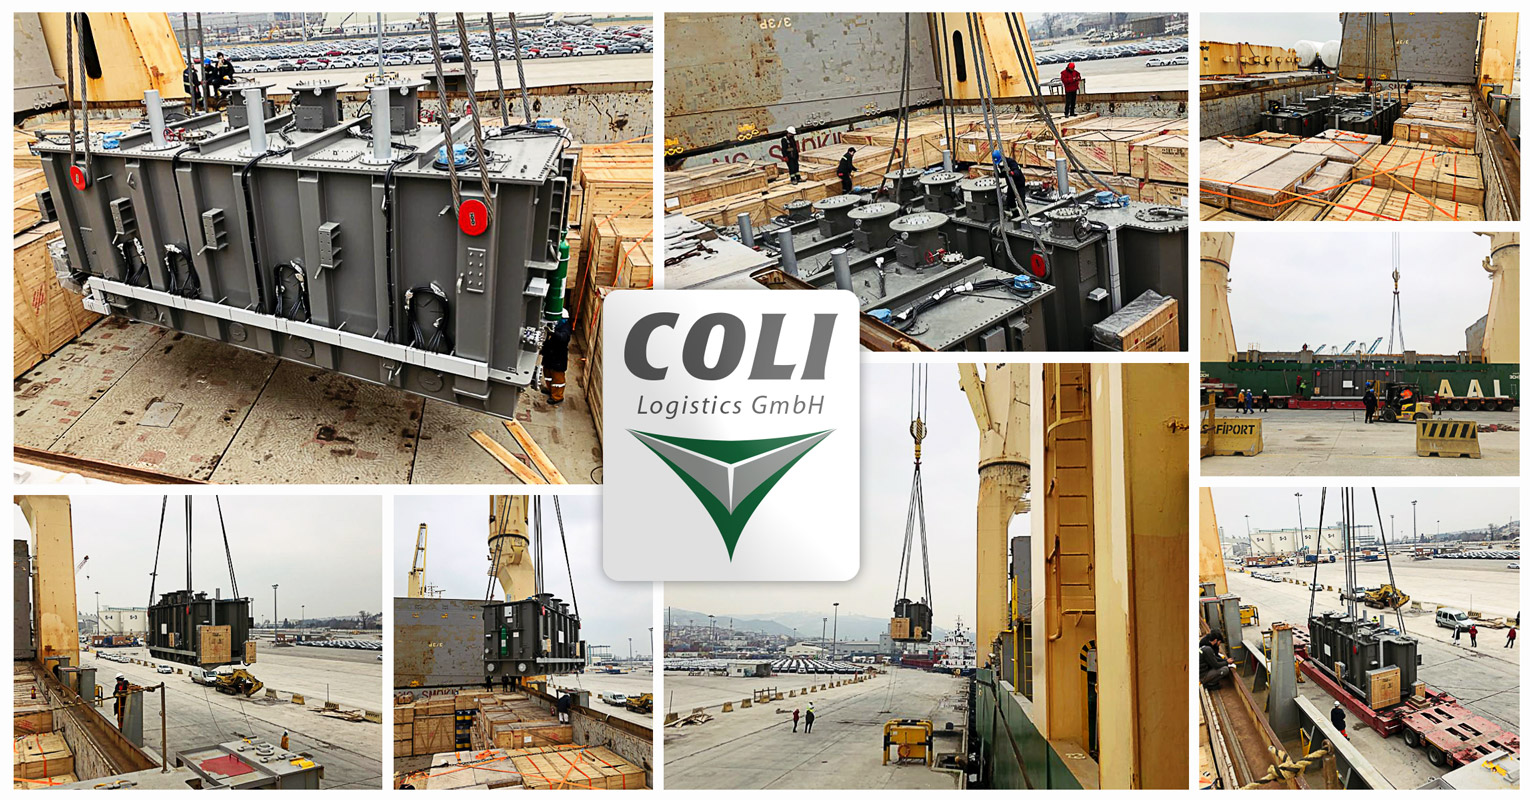 Coli Project Cargo Istanbul Shipped 2 Sets of Transformers Weighing 173 mts Each from Derince to Haydarpasa